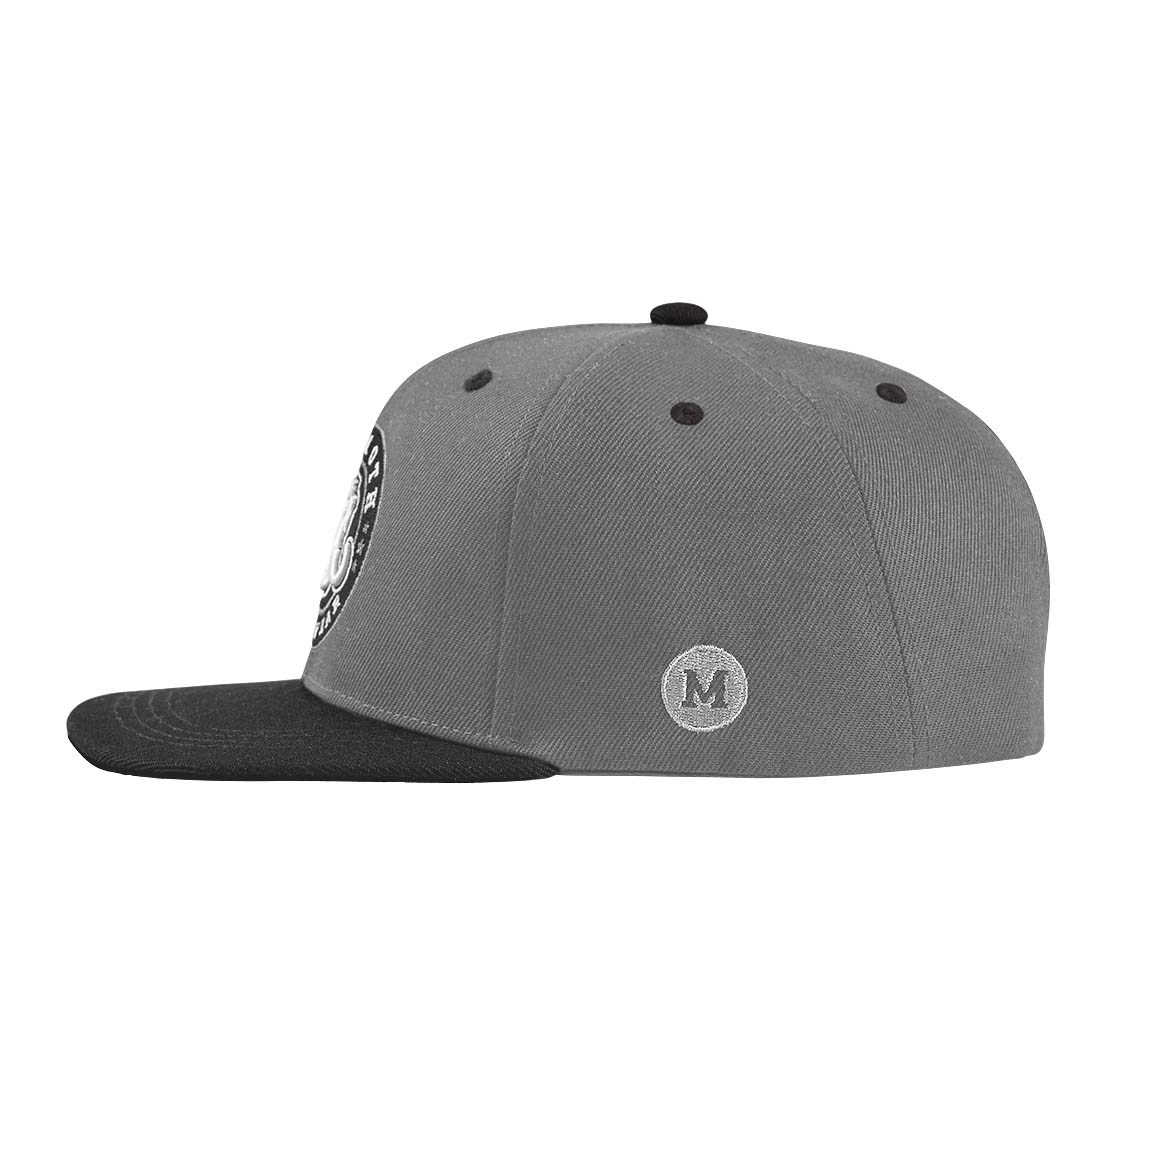 CLASSIC SNAPBACK - GREY - Side View